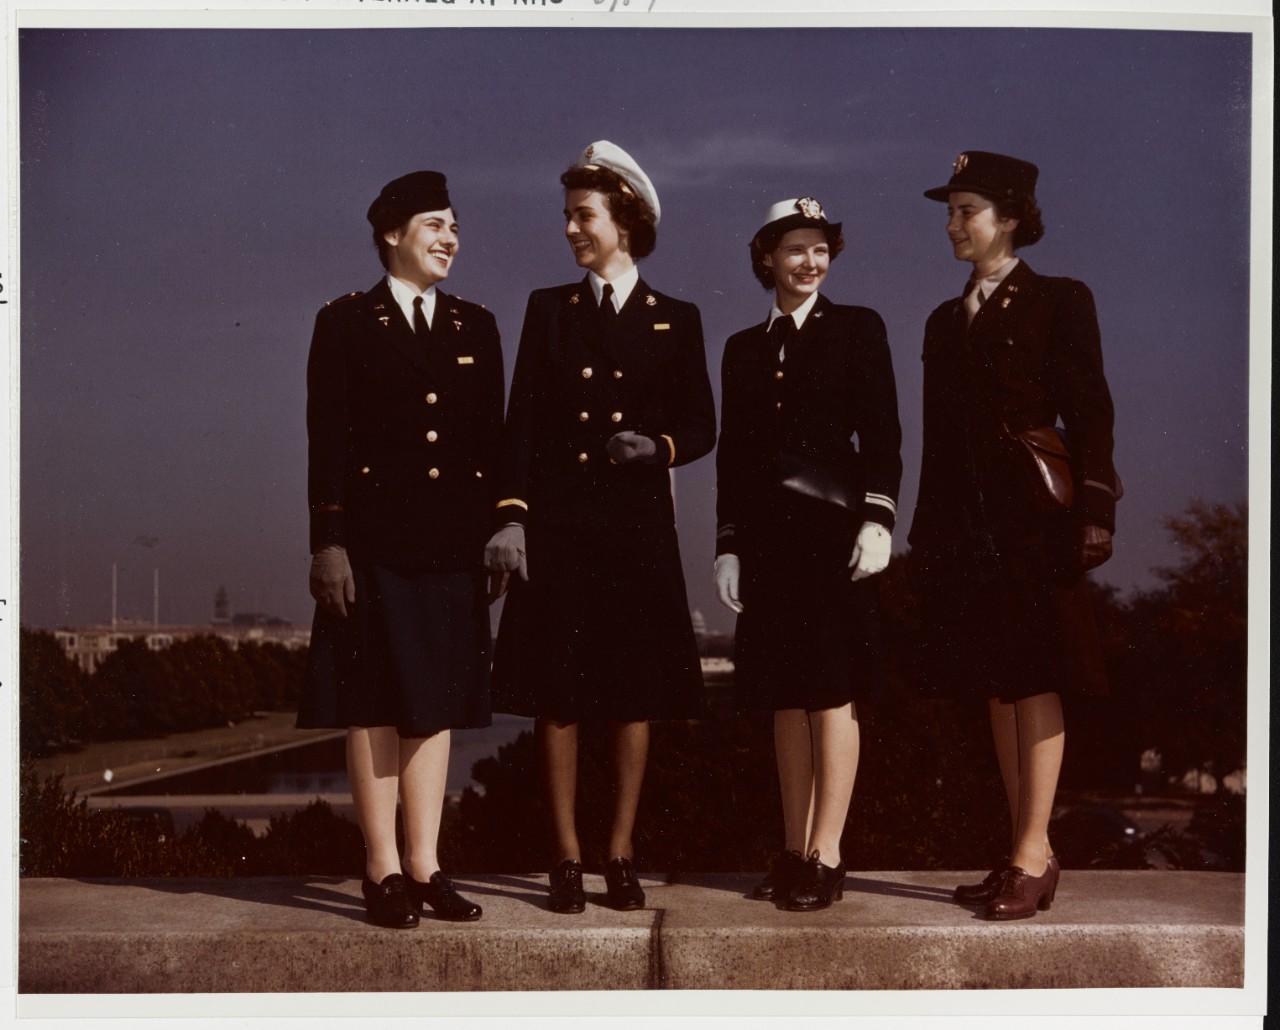 Women of the armed forces circa 1942-43.